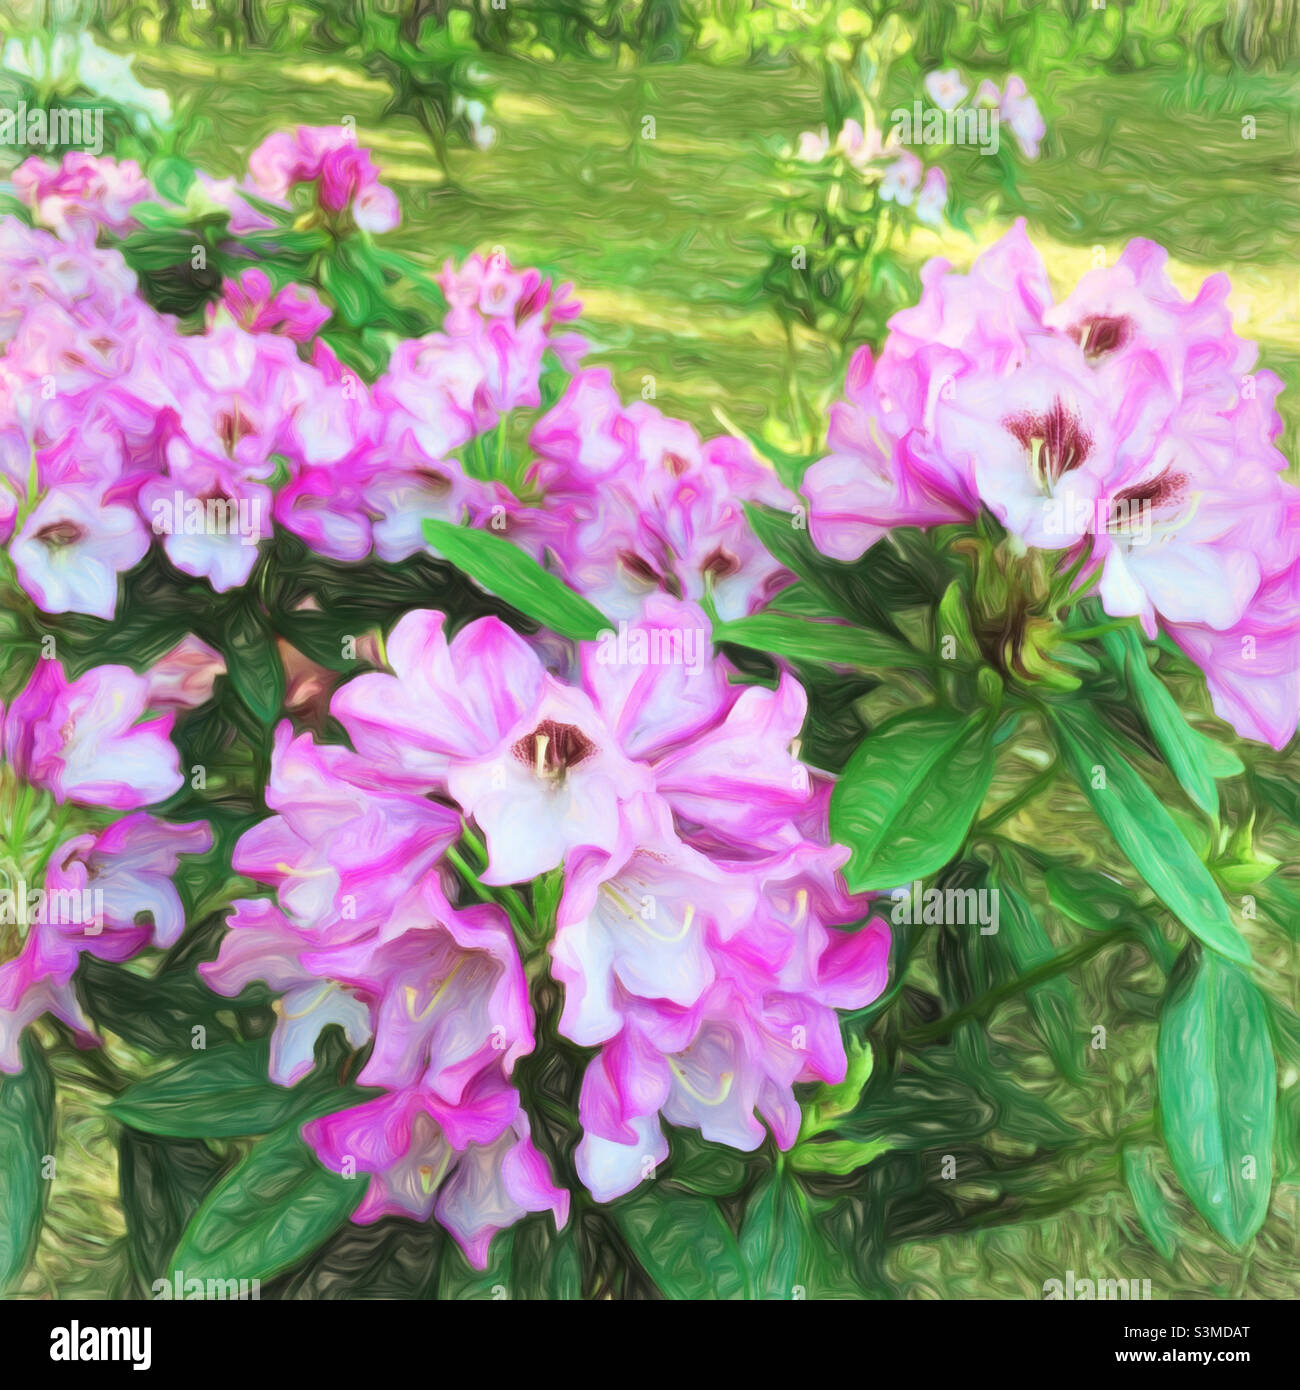 Digital art of gorgeous pink colored rhododendrons growing in a backyard garden. Stock Photo